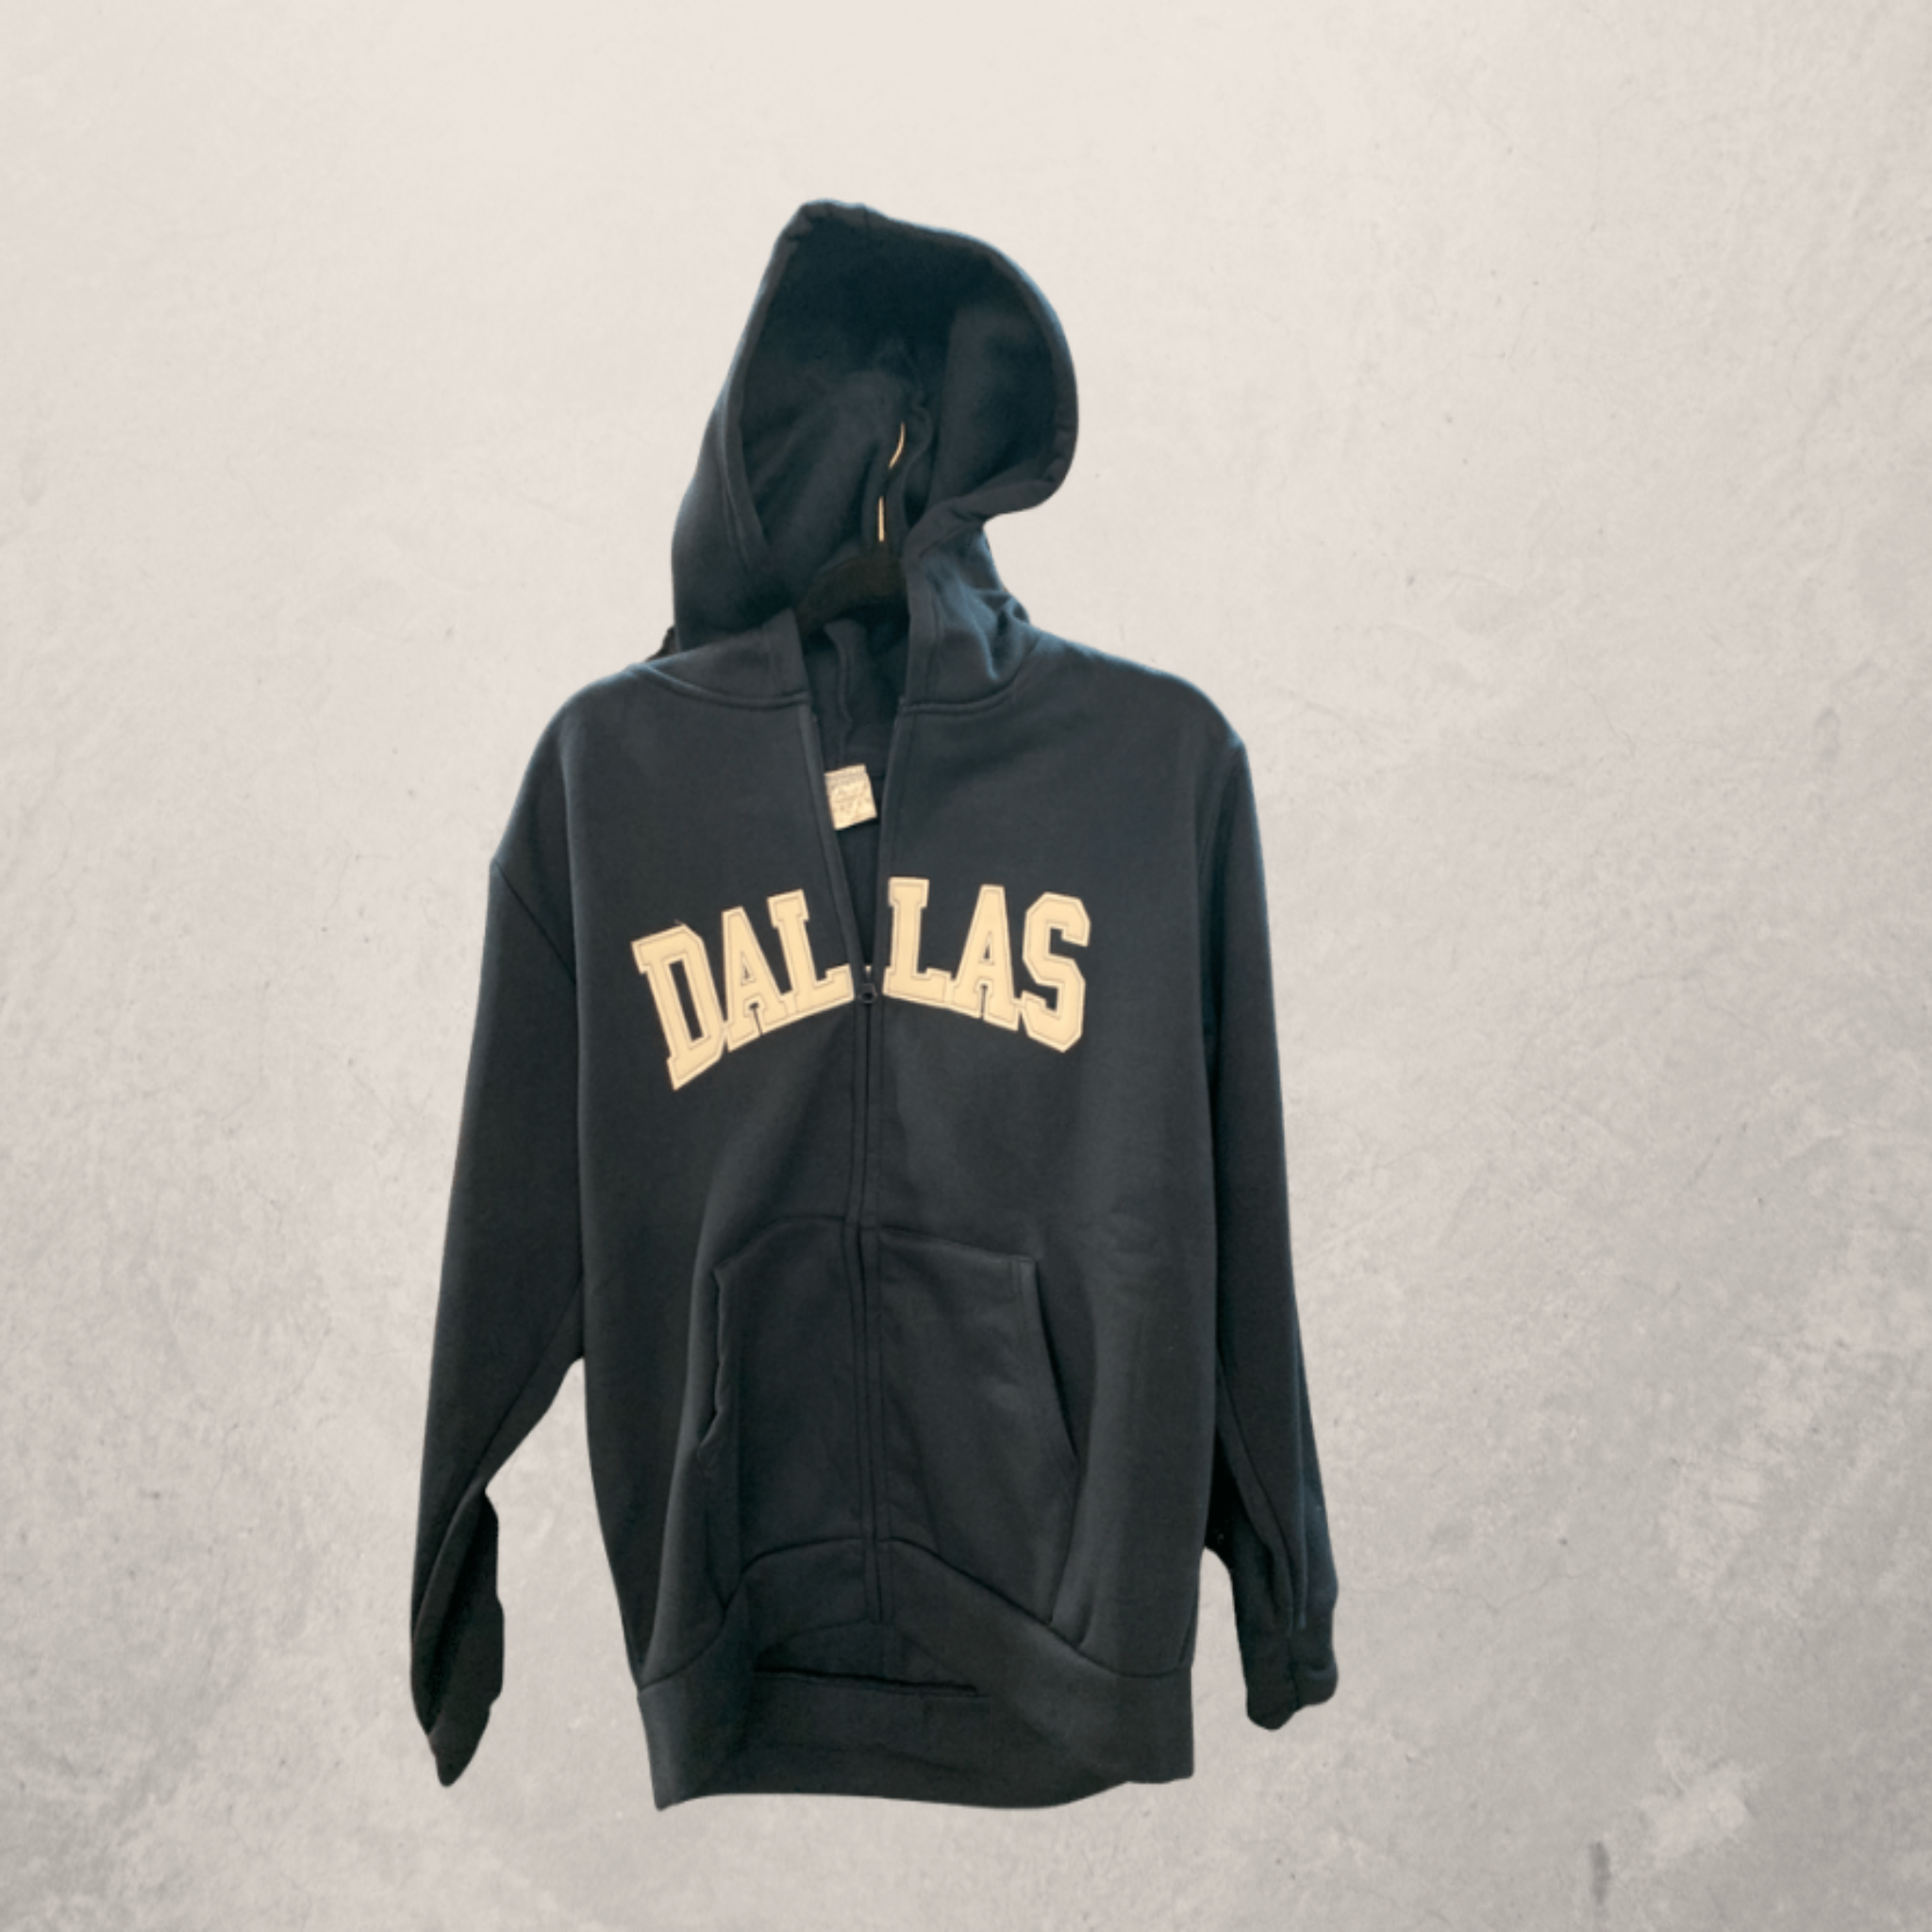 Hoodie Jackets Dallas and Texas